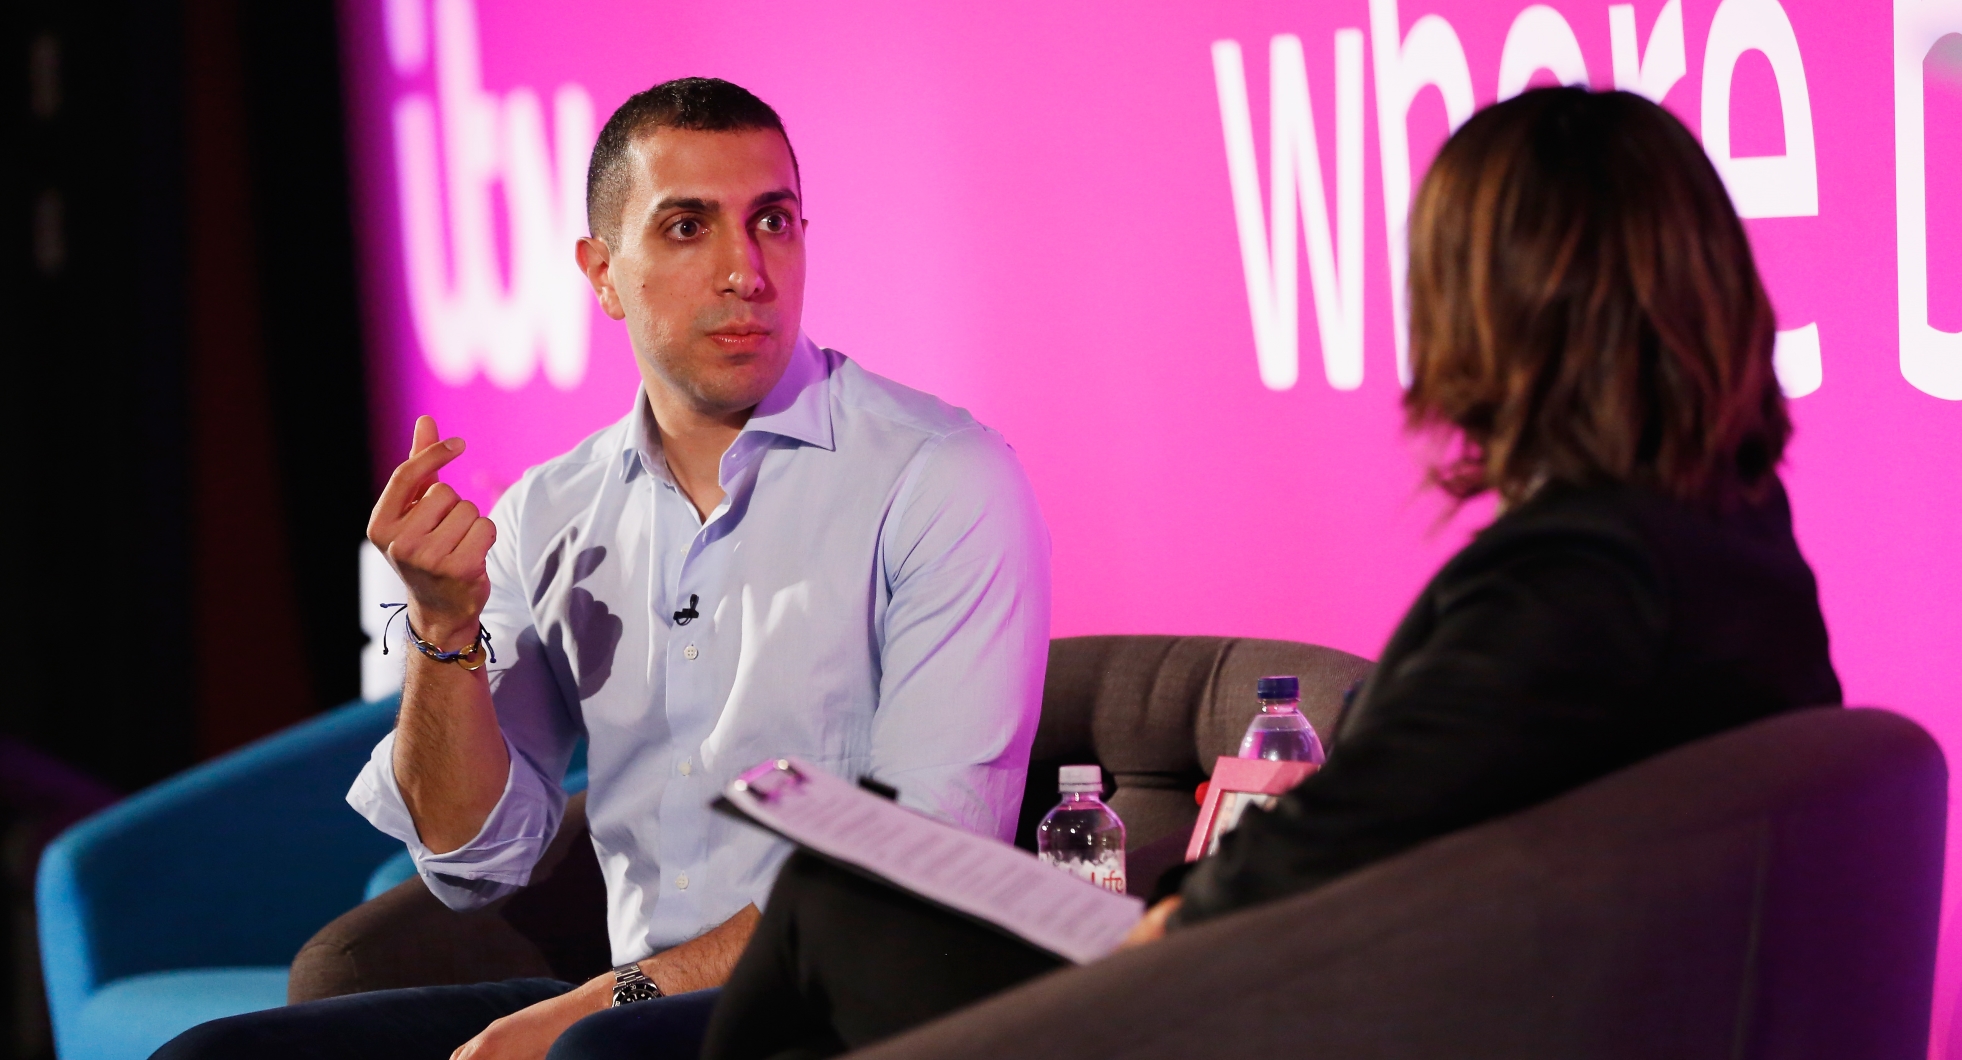 Tinder CEO Talks Making Money: “It actually helps the ecosystem”